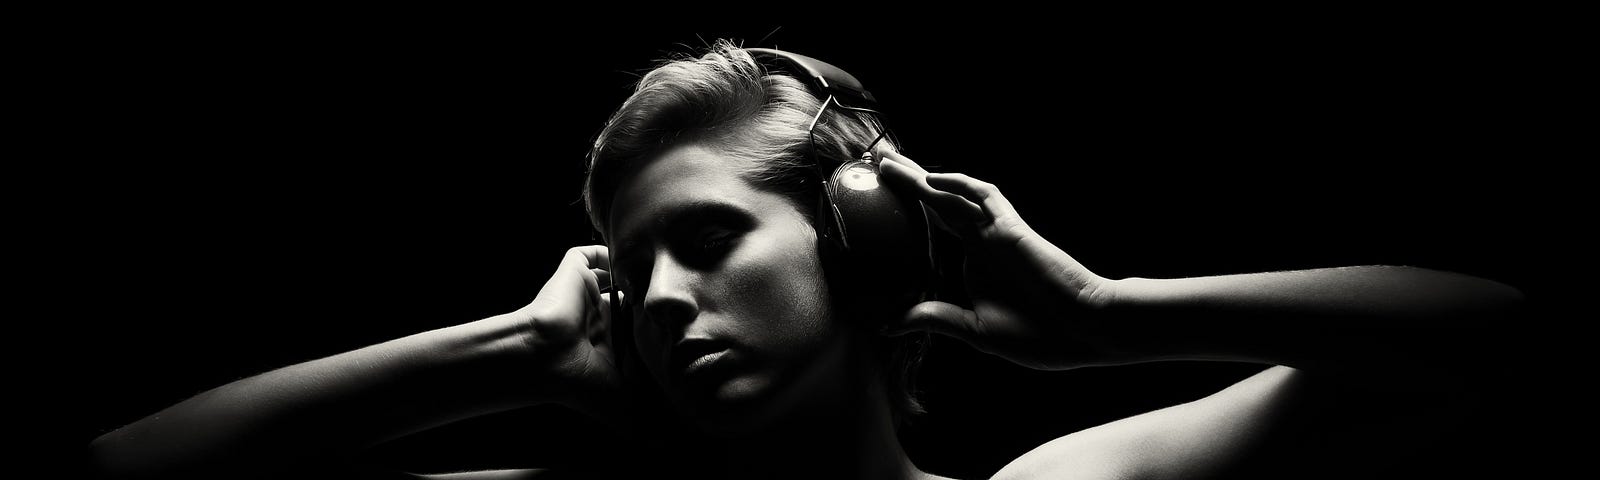 Black and white photo. Head and shoulders of a beautiful woman with headphones on emerges from a black background.